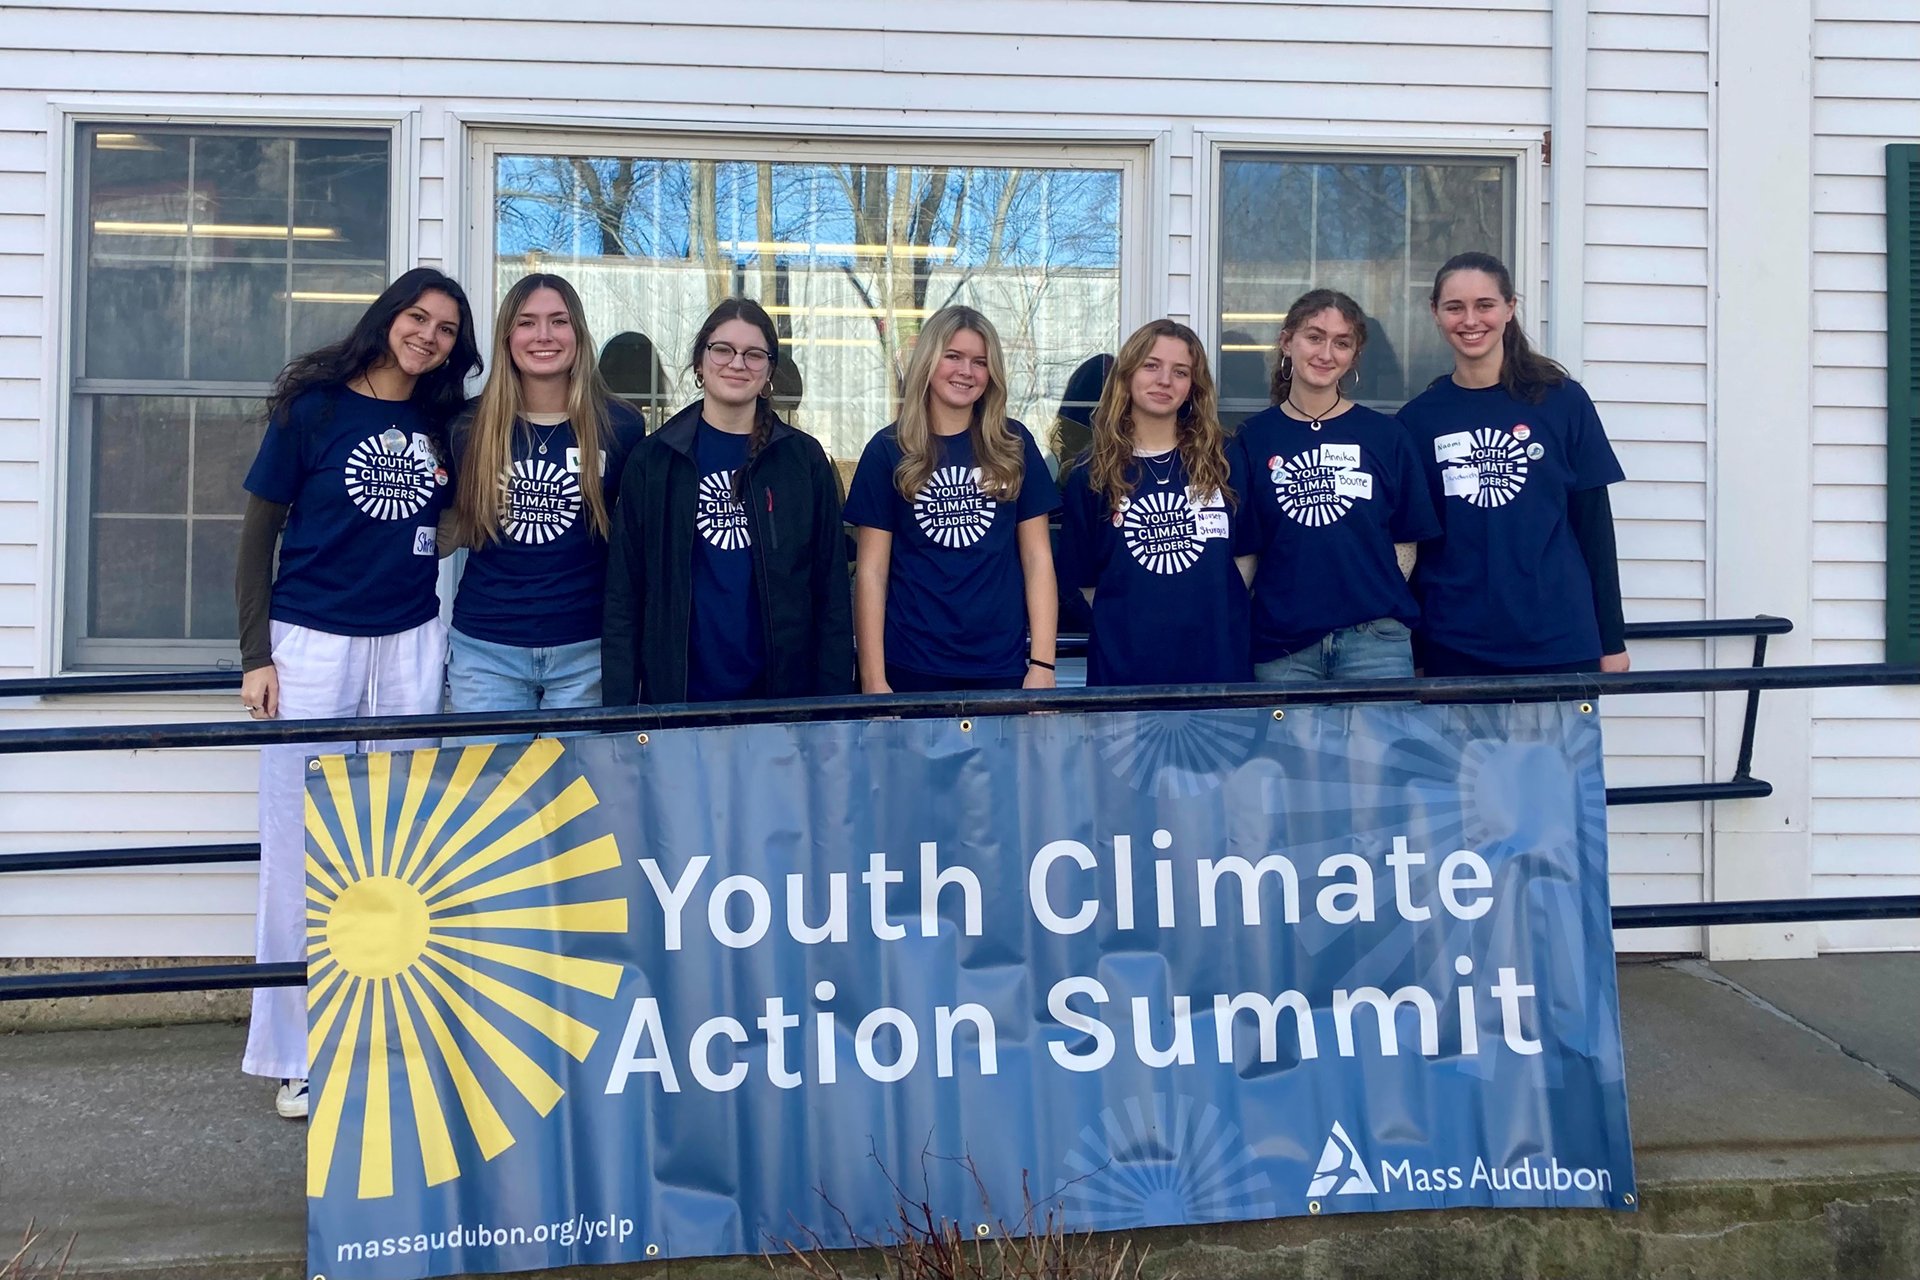 Group of Youth Climate Action Summit attendees posing for a picture behind a banner of the same name